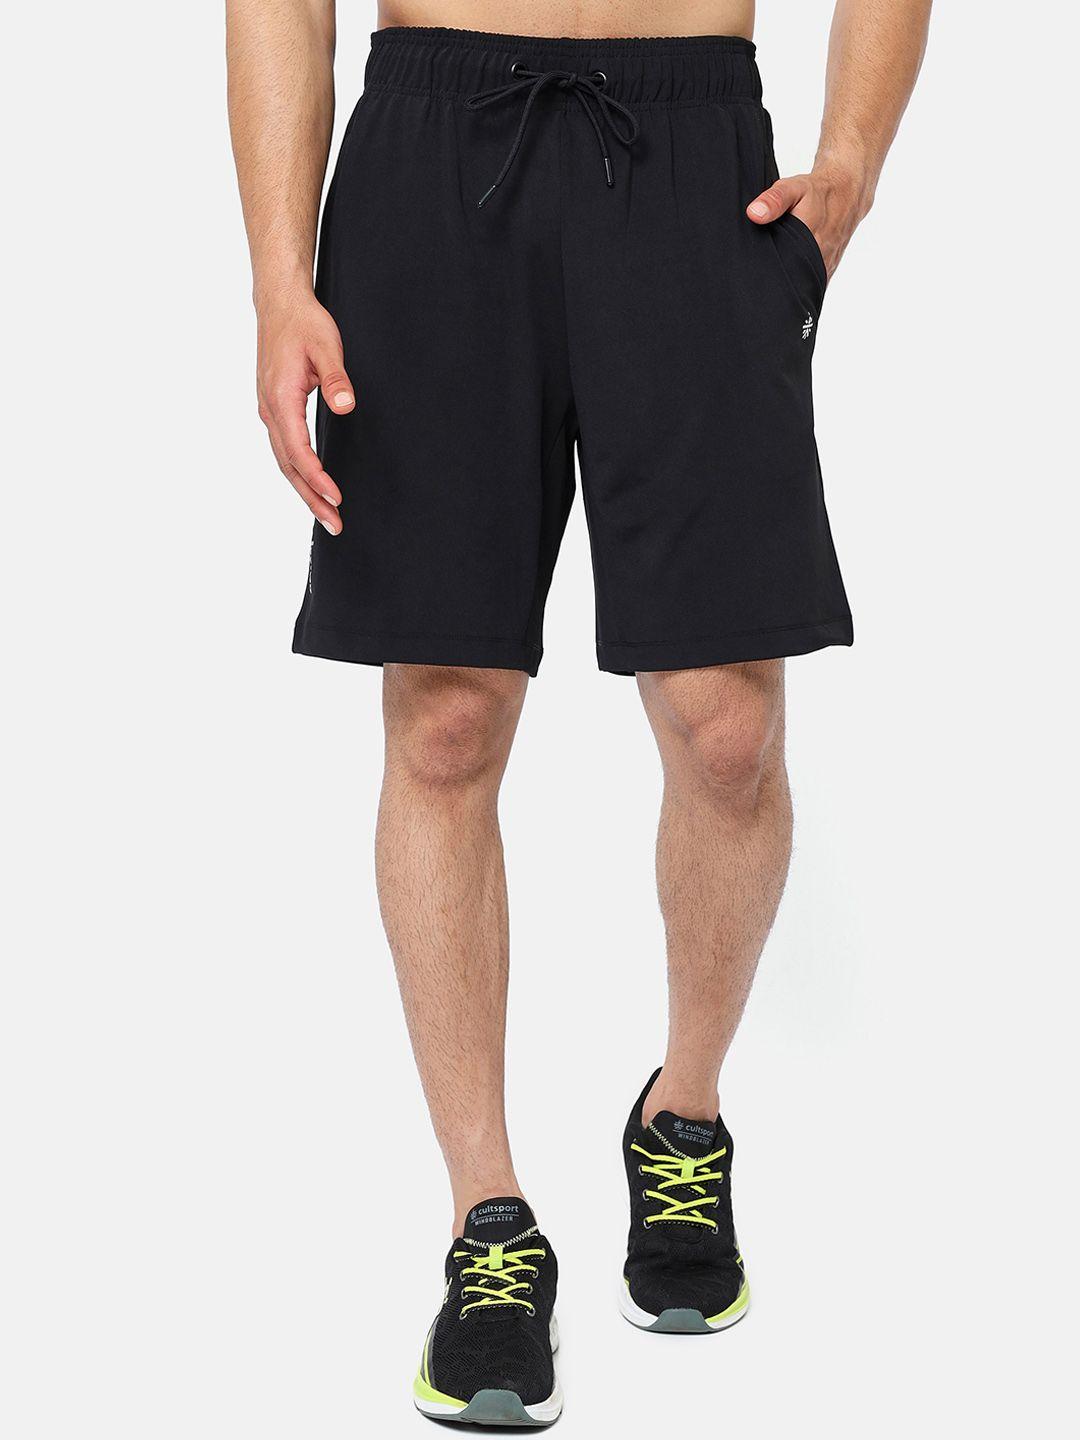 cultsport men supersoft active sports shorts with drawcords